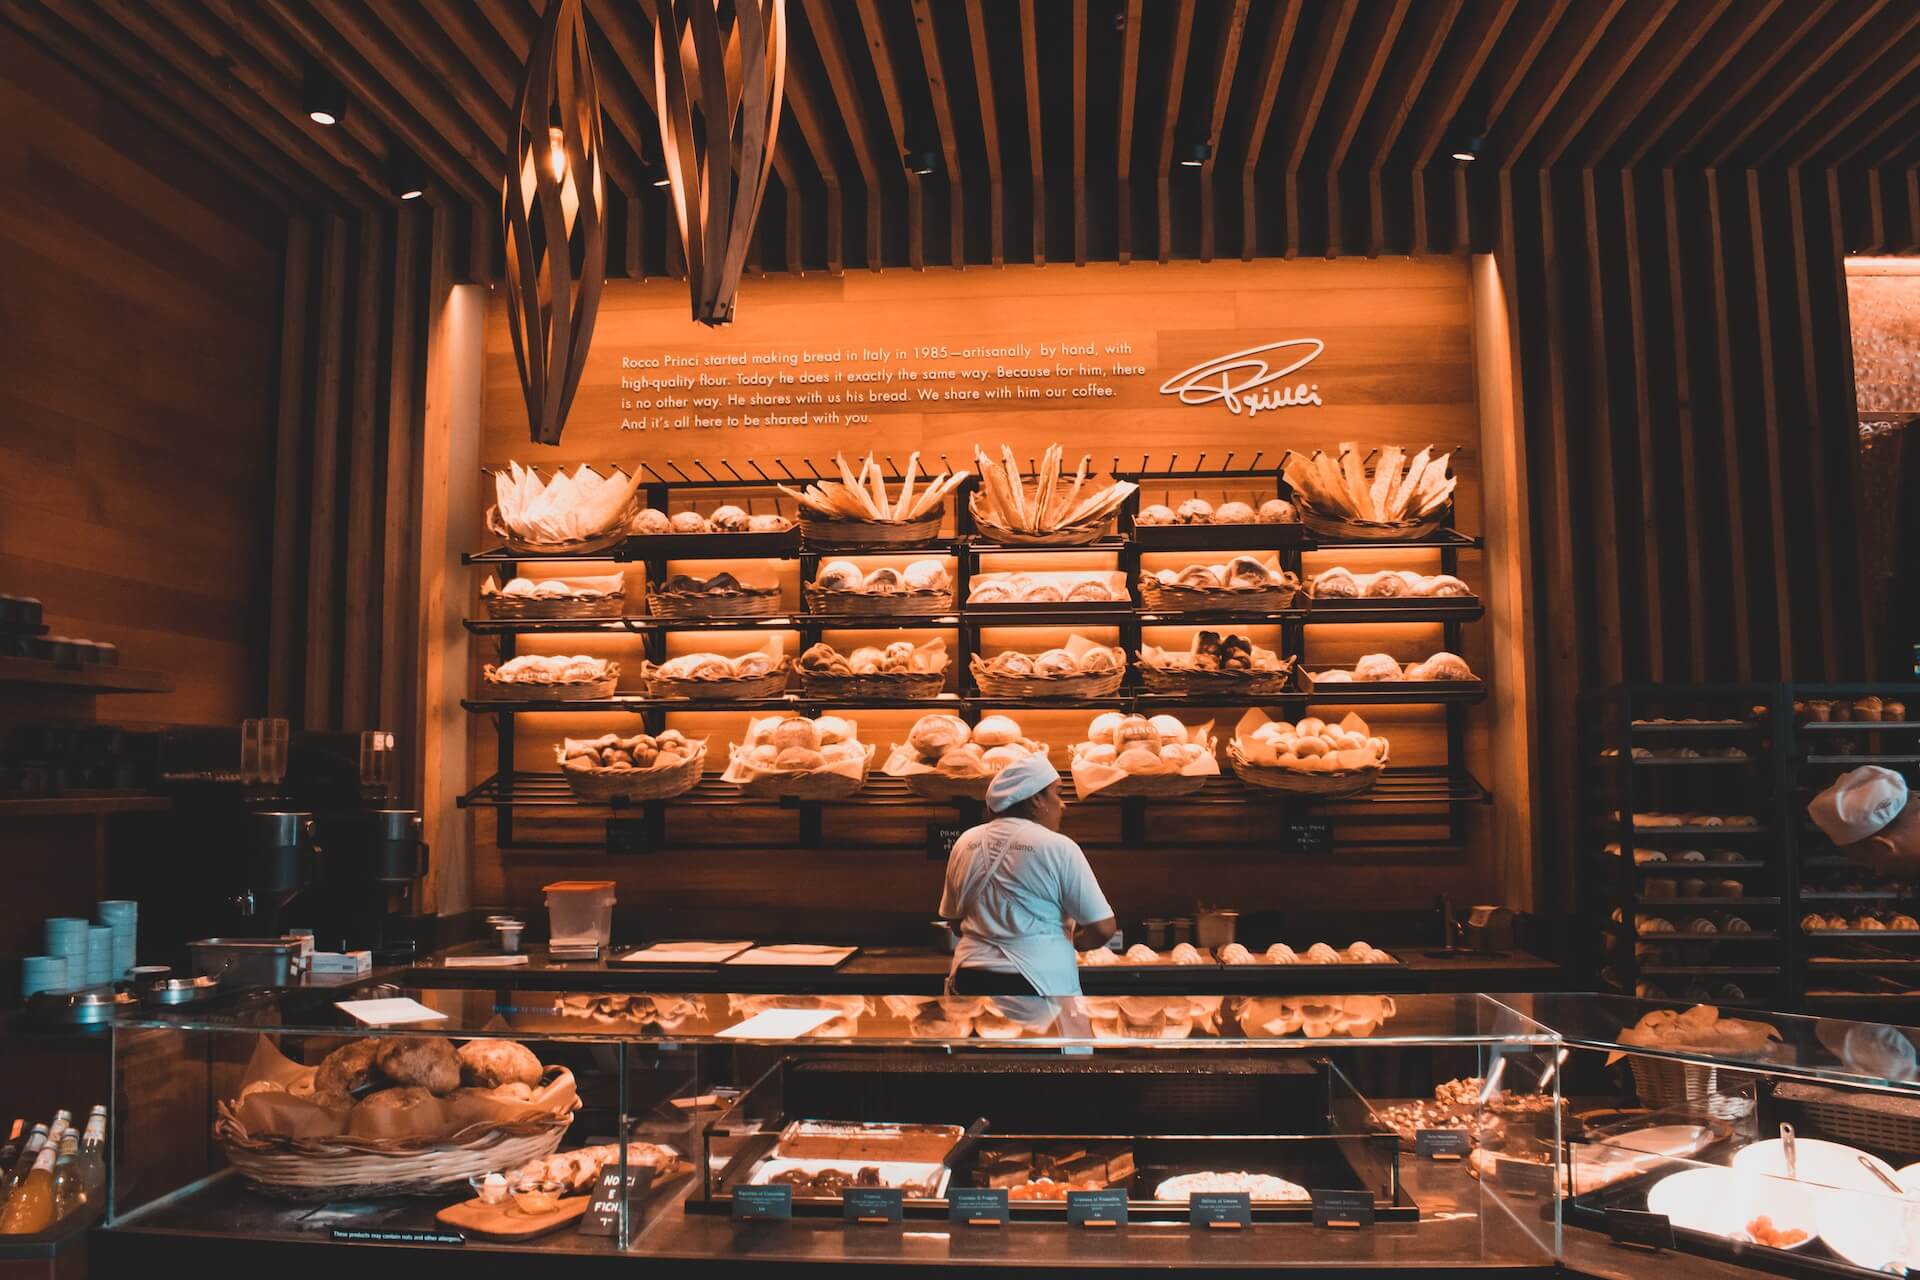 How to start a bakery business from home